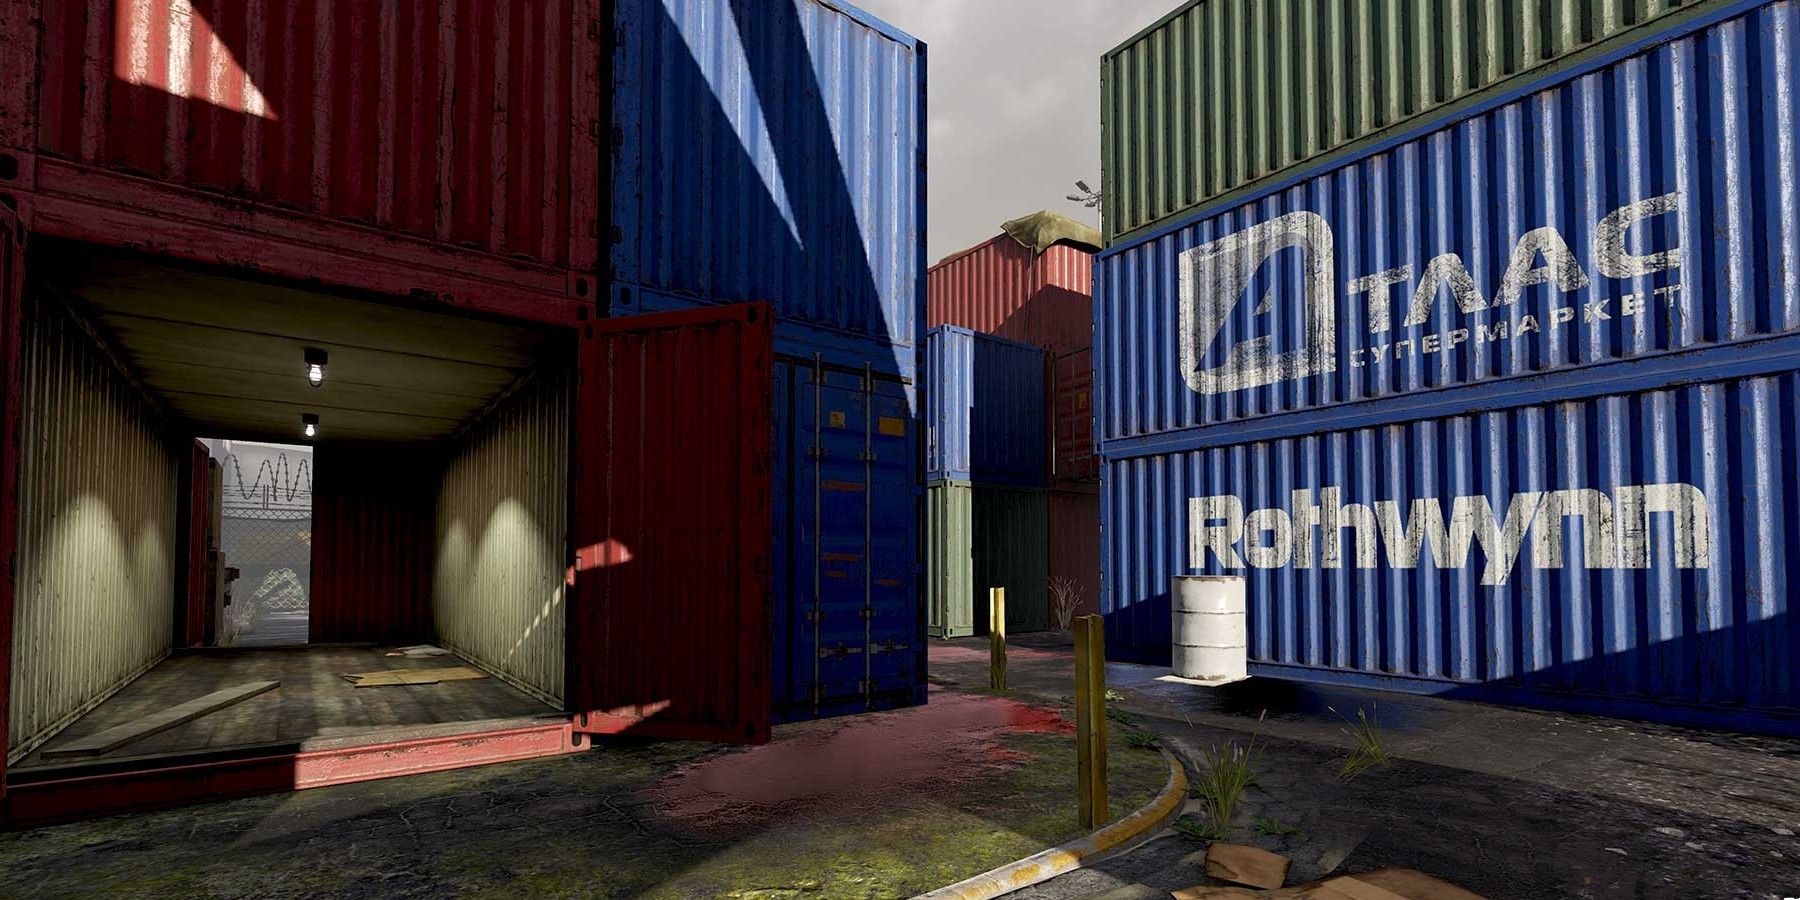 Next Call of Duty Modern Warfare 2 Update Adding Shipment and Double XP